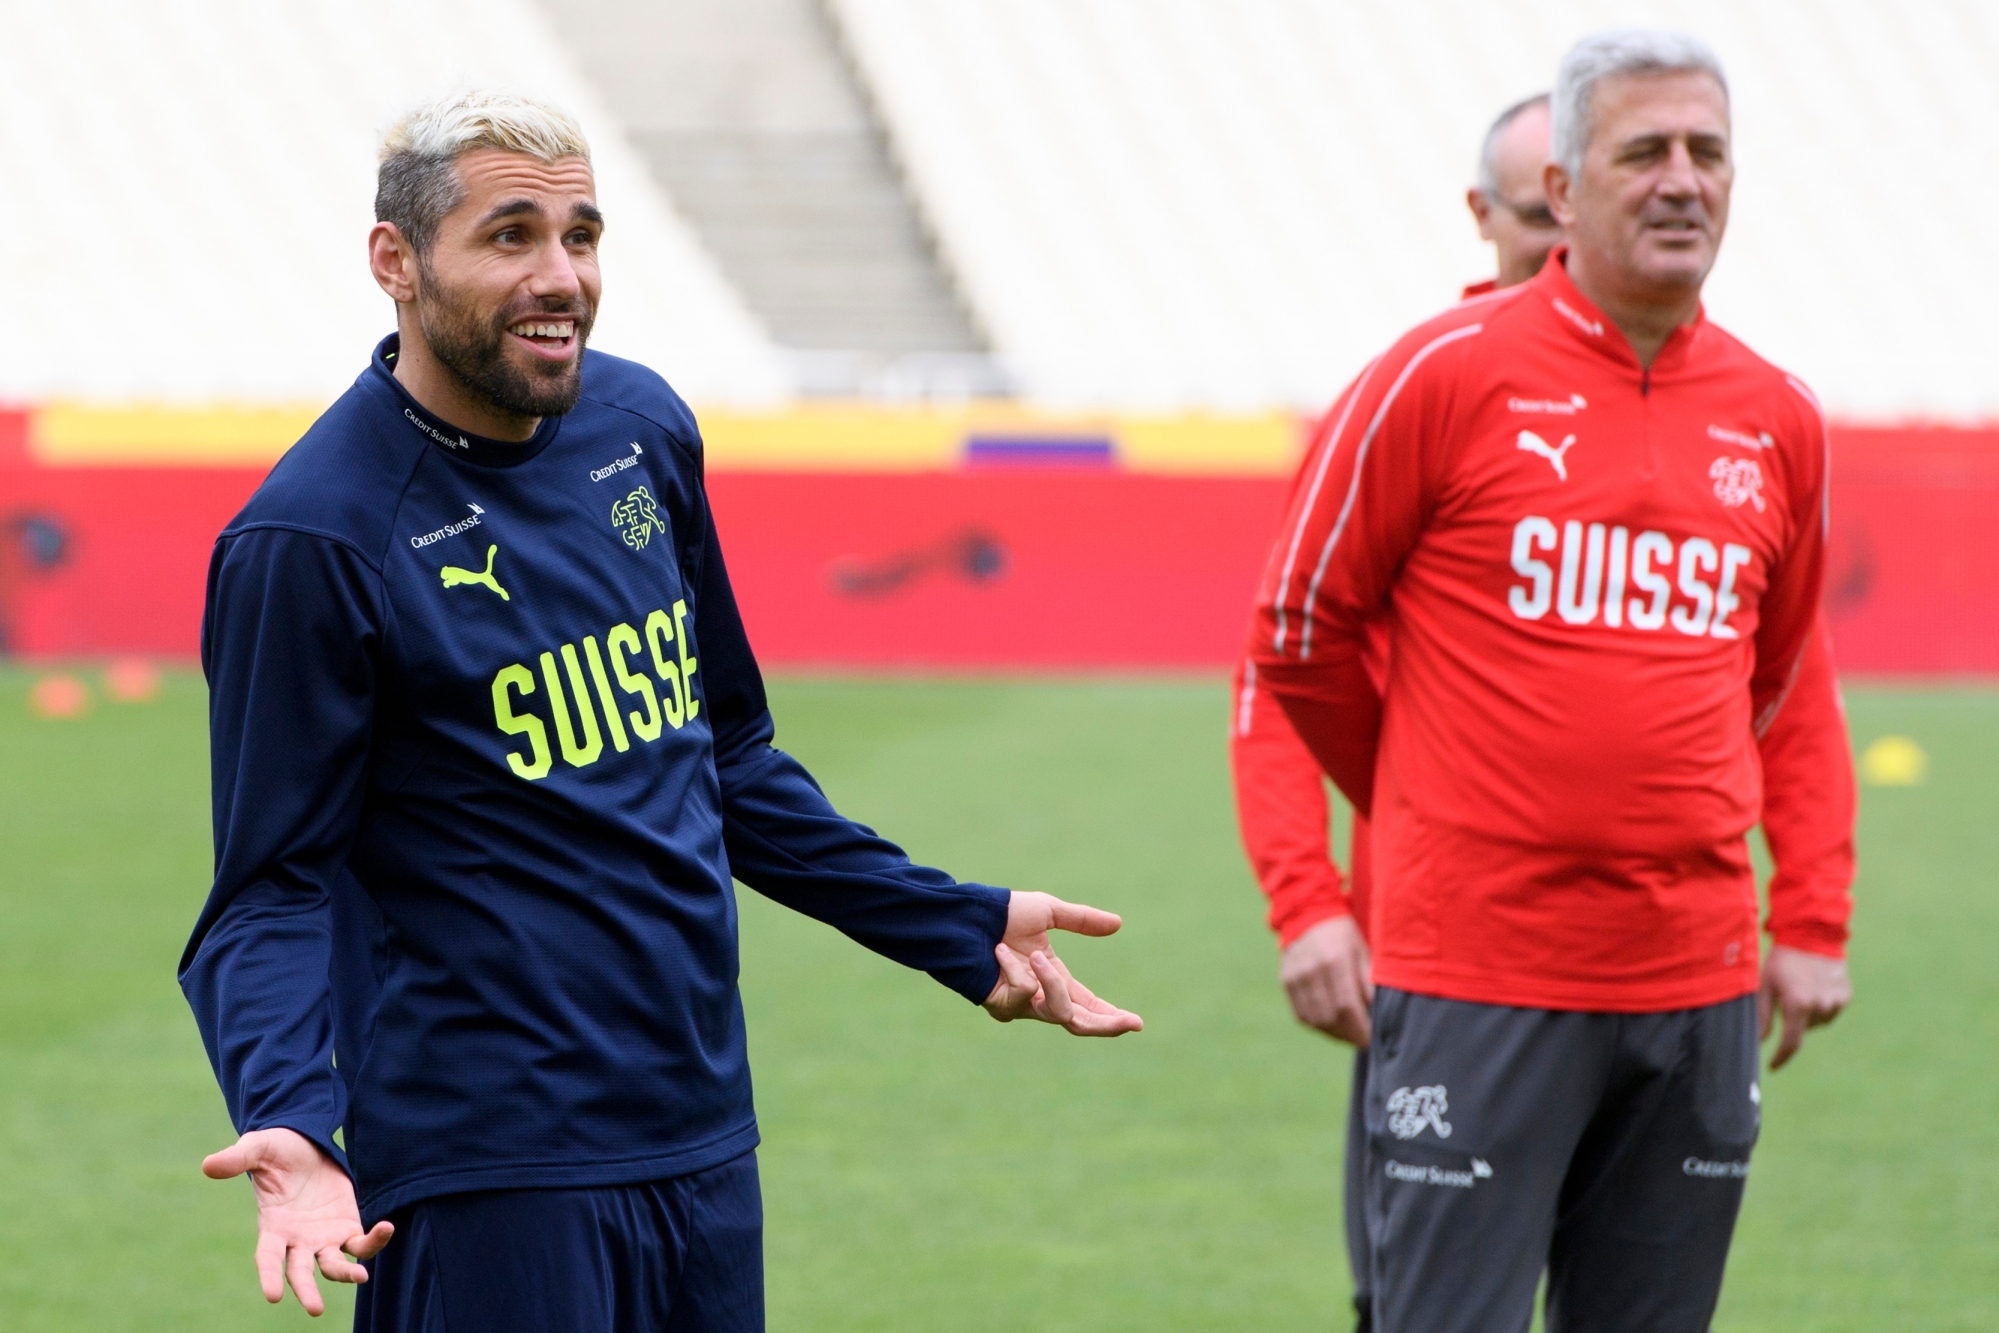 Swiss national team soccer player Valon Behrami, left, smiles next to head coach Vladimir Petkovic, right, during a training session at the Olympic stadium, in Athens, Greece, Thursday, March 22, 2018. Switzerland will face Greece in Athens on March 23, 2018 for a friendly soccer match on preparation for the upcomming 2018 Fifa World Cup in Russia. (KEYSTONE/Laurent Gillieron) GREECE SOCCER TEAM SWITZELRAND